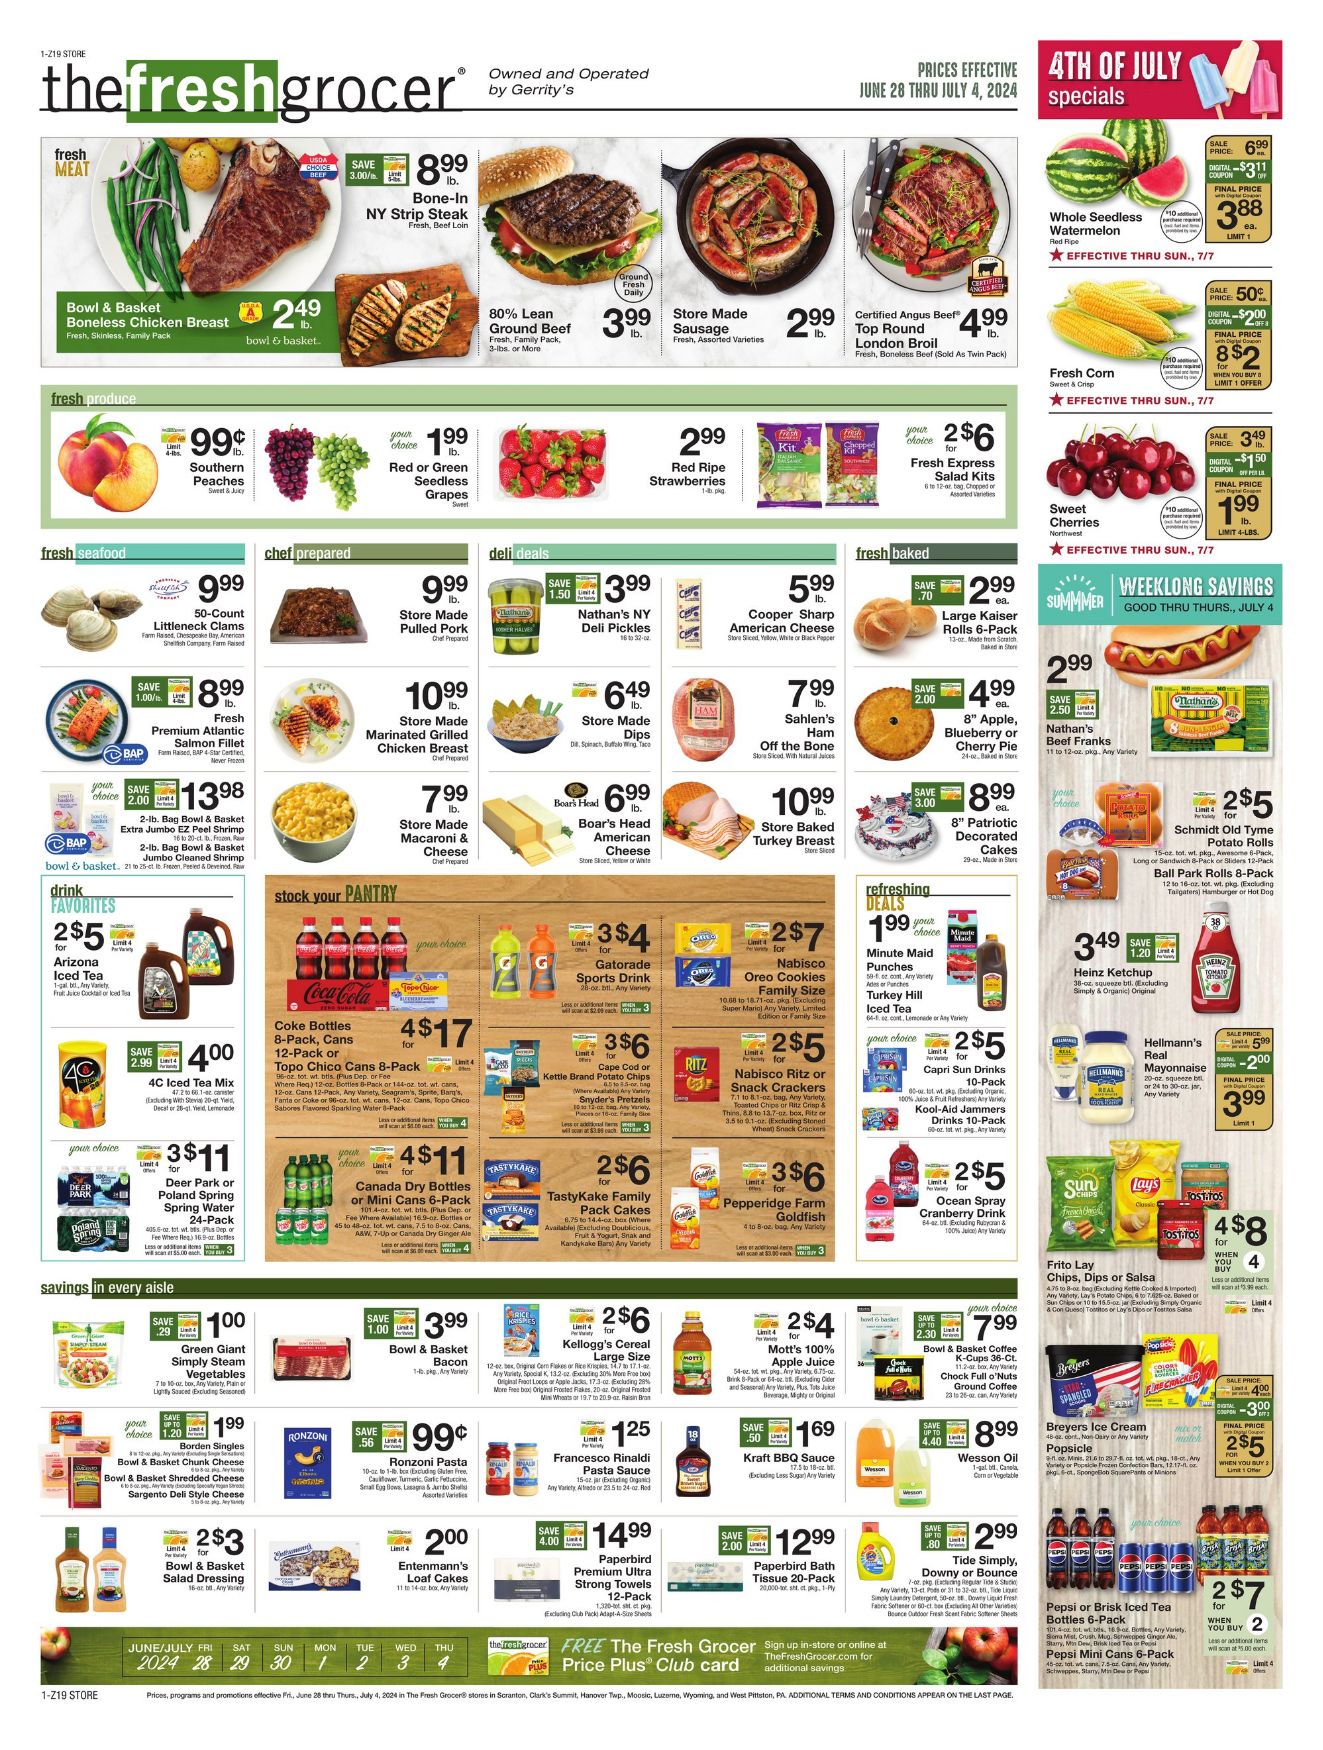 Gerrity's Supermarkets Promotional weekly ads